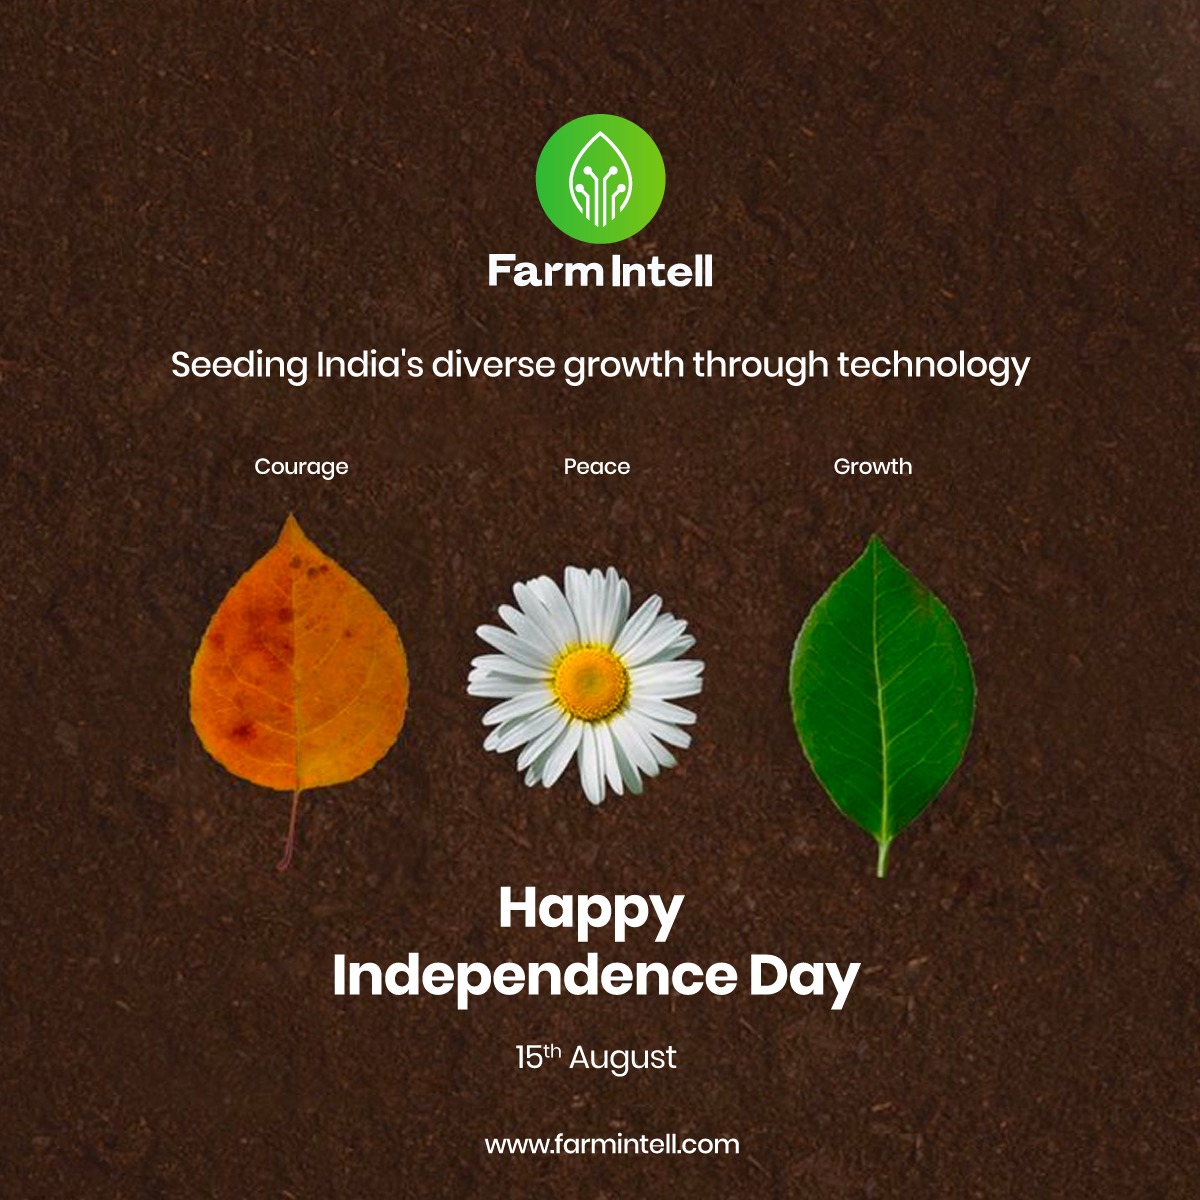 Celebrating India's journey towards progress and innovation this Independence Day! 🇮🇳🌱 Seeding India's growth through technology and paving the way for a brighter future. Happy 15th of August! 
#IndependenceDay #TechForProgress